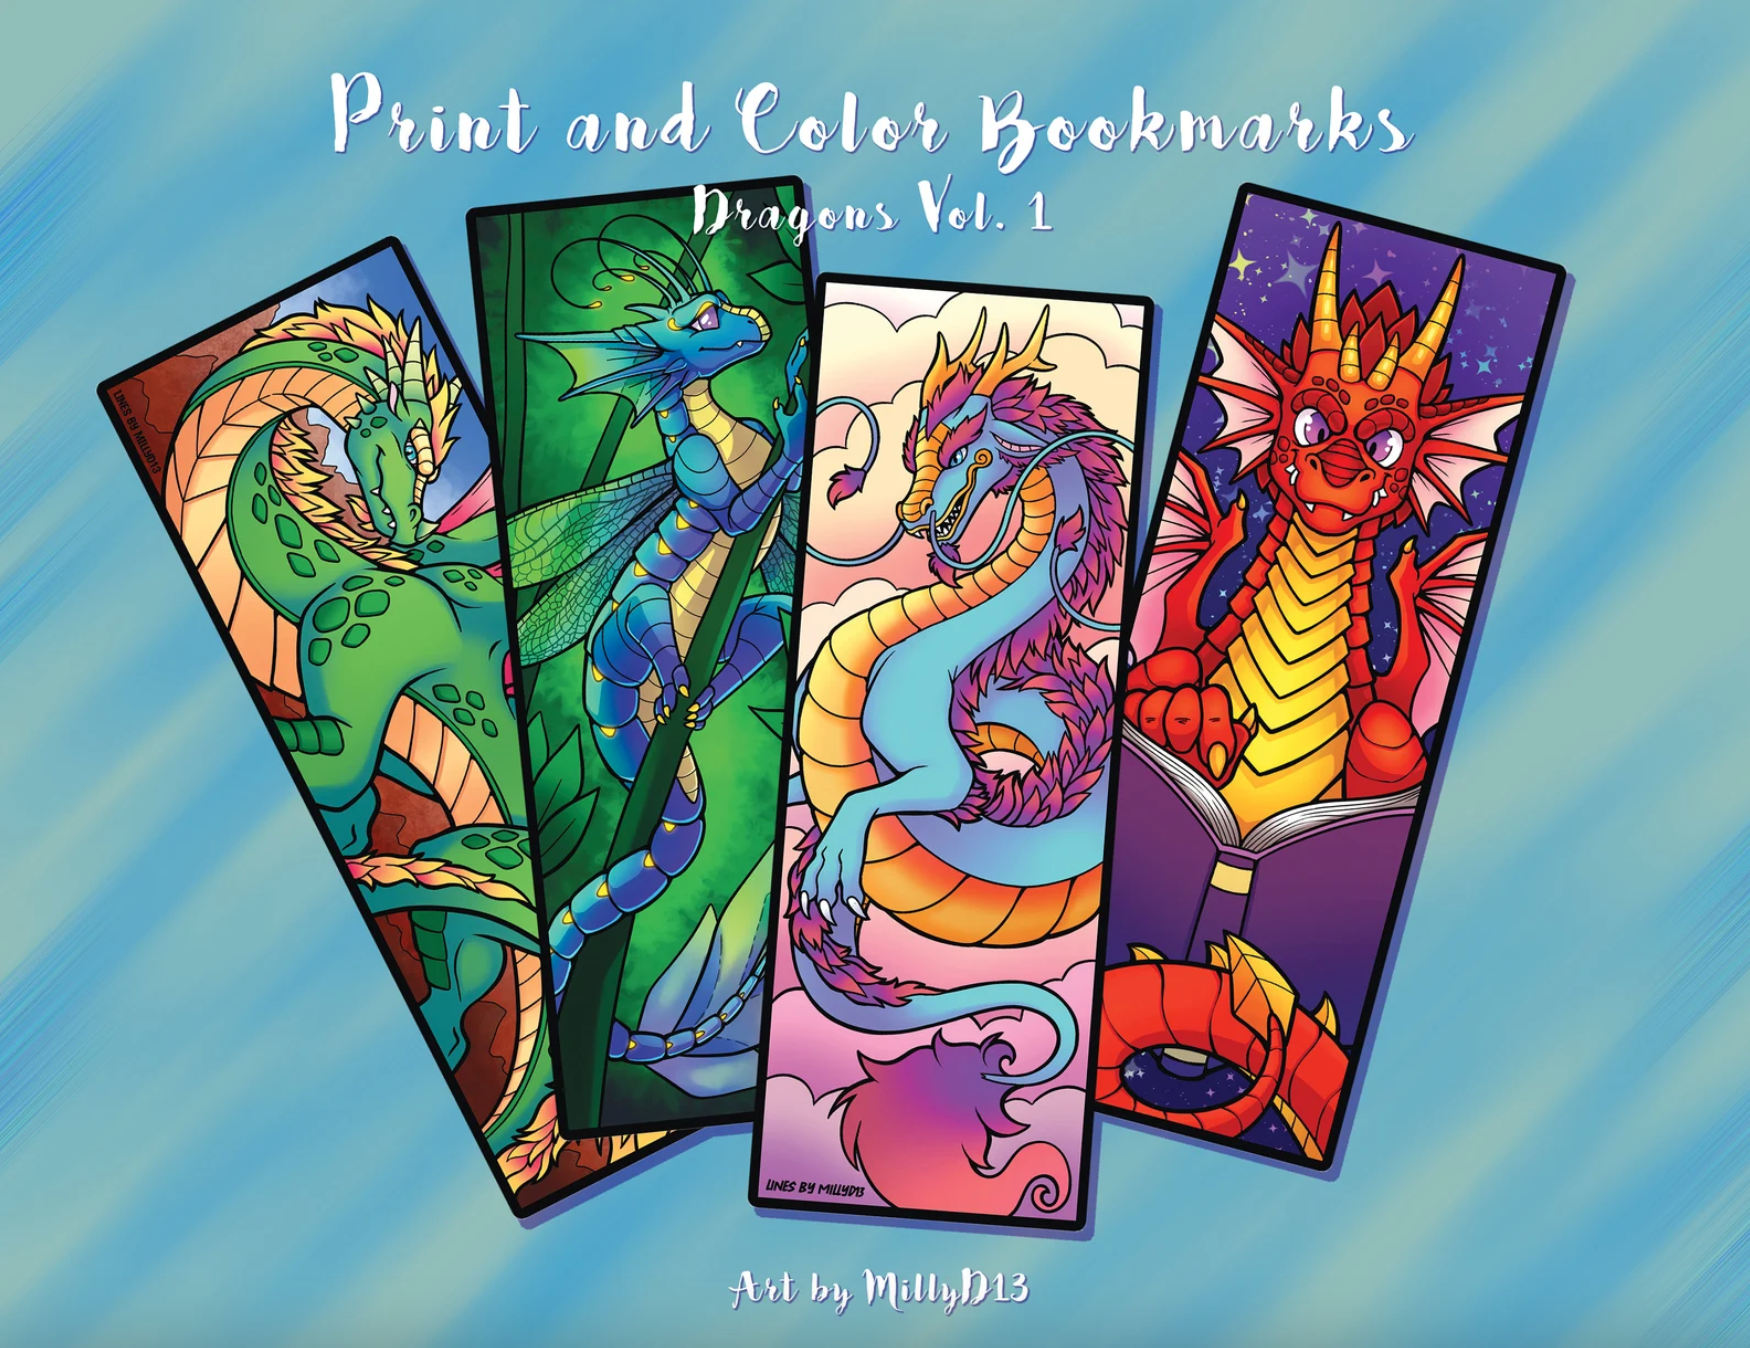 Four printable dragon bookmarks you can color in